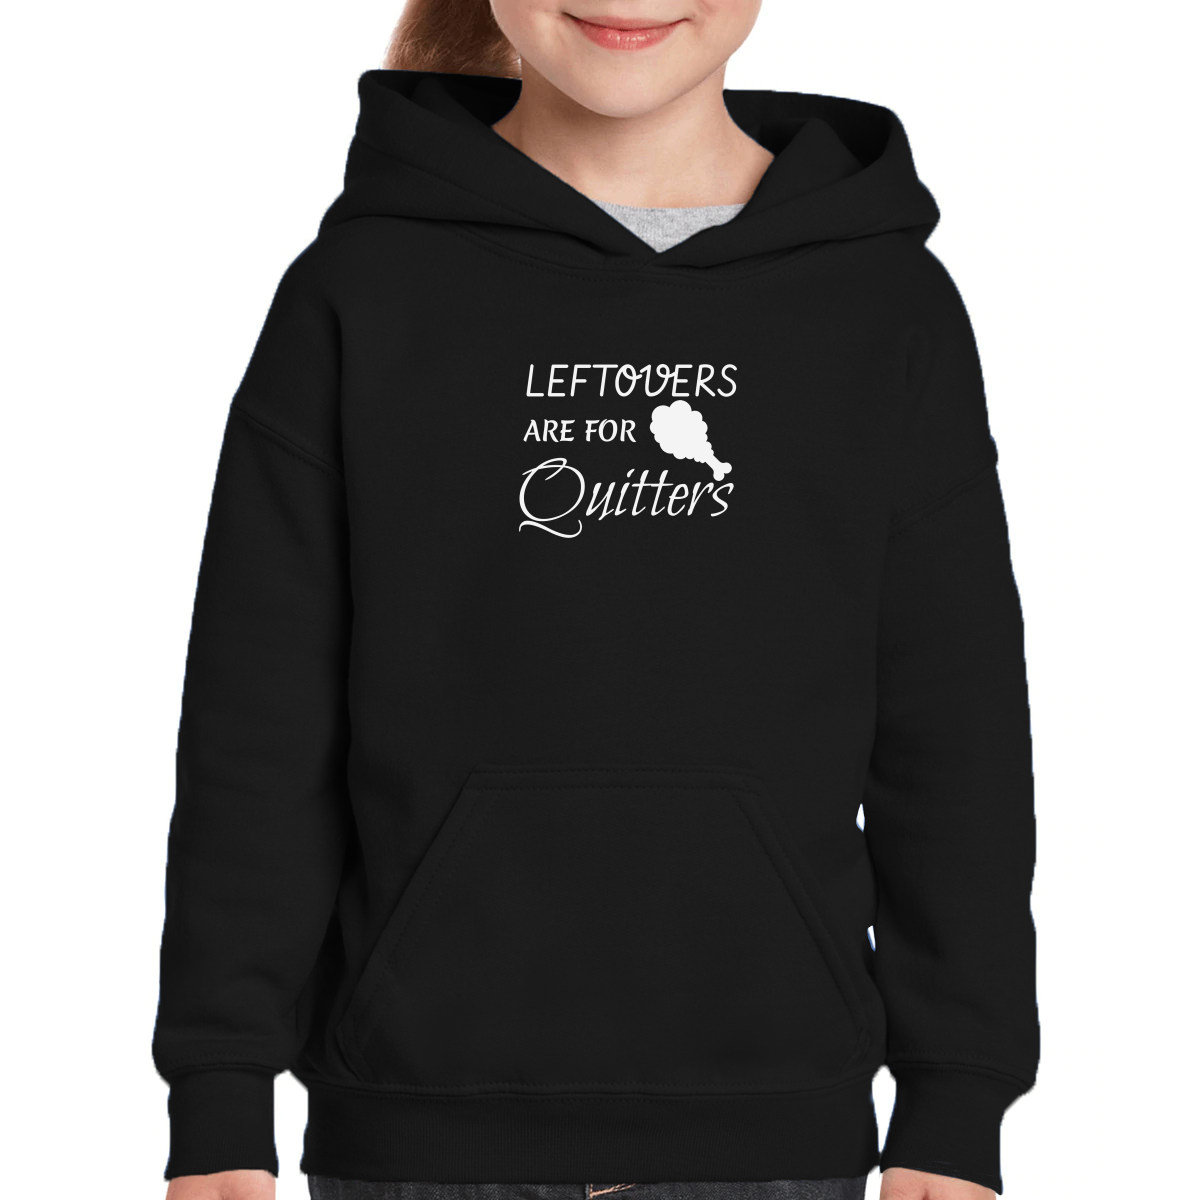 Leftovers Are For Quitters Kids Hoodie | Black